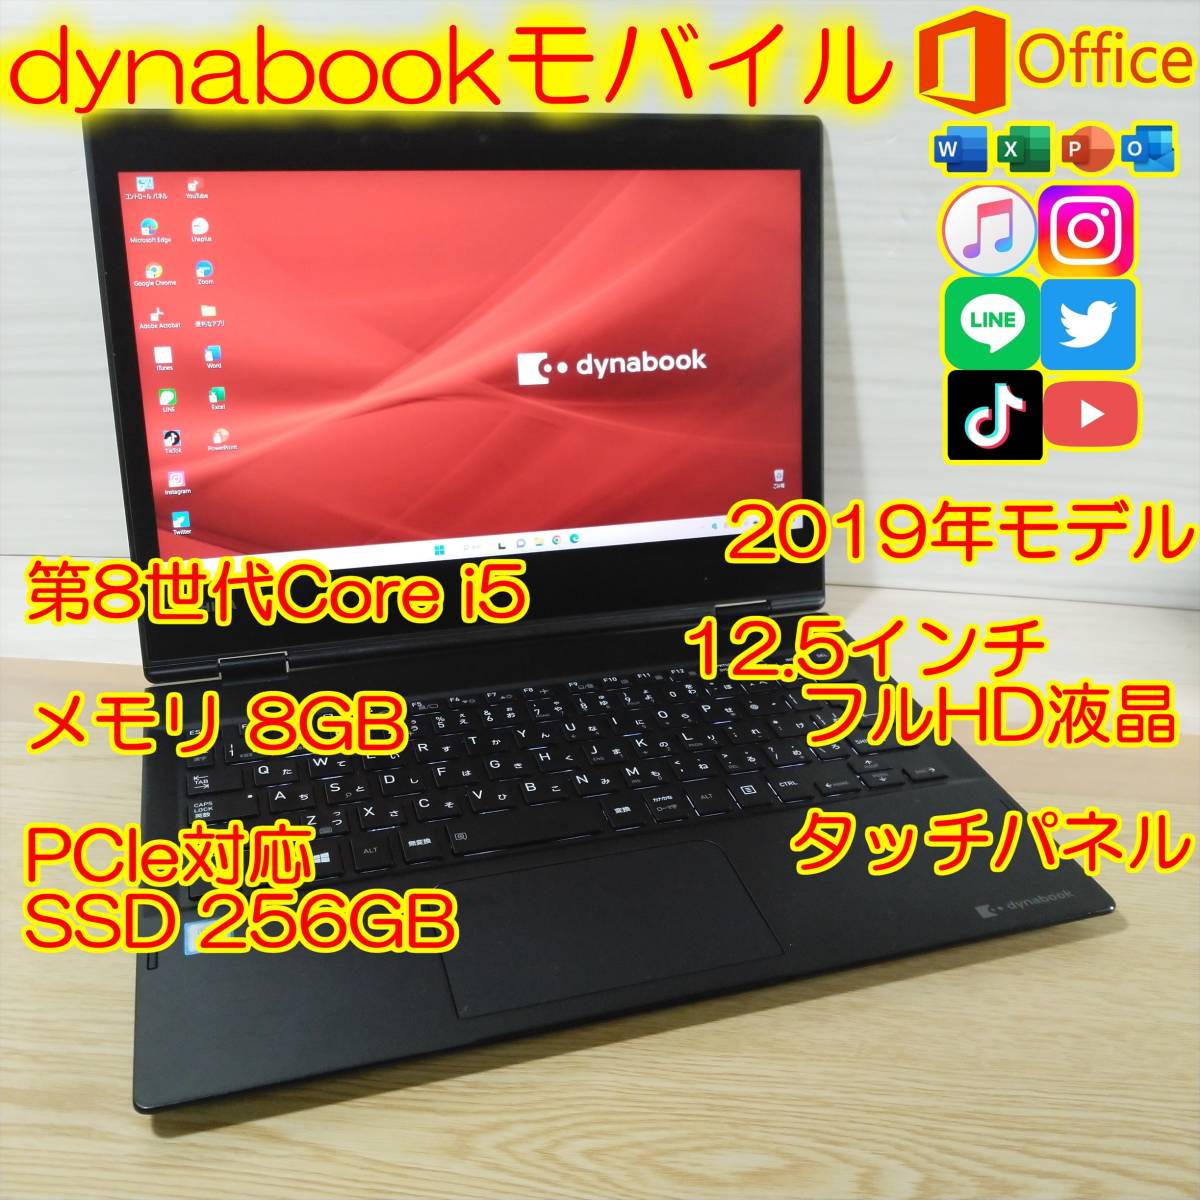 PC/タブレット ノートPC 桜桃様 専用】TOSHIBA dynabook VC72/M PC/タブレット ノートPC PC 